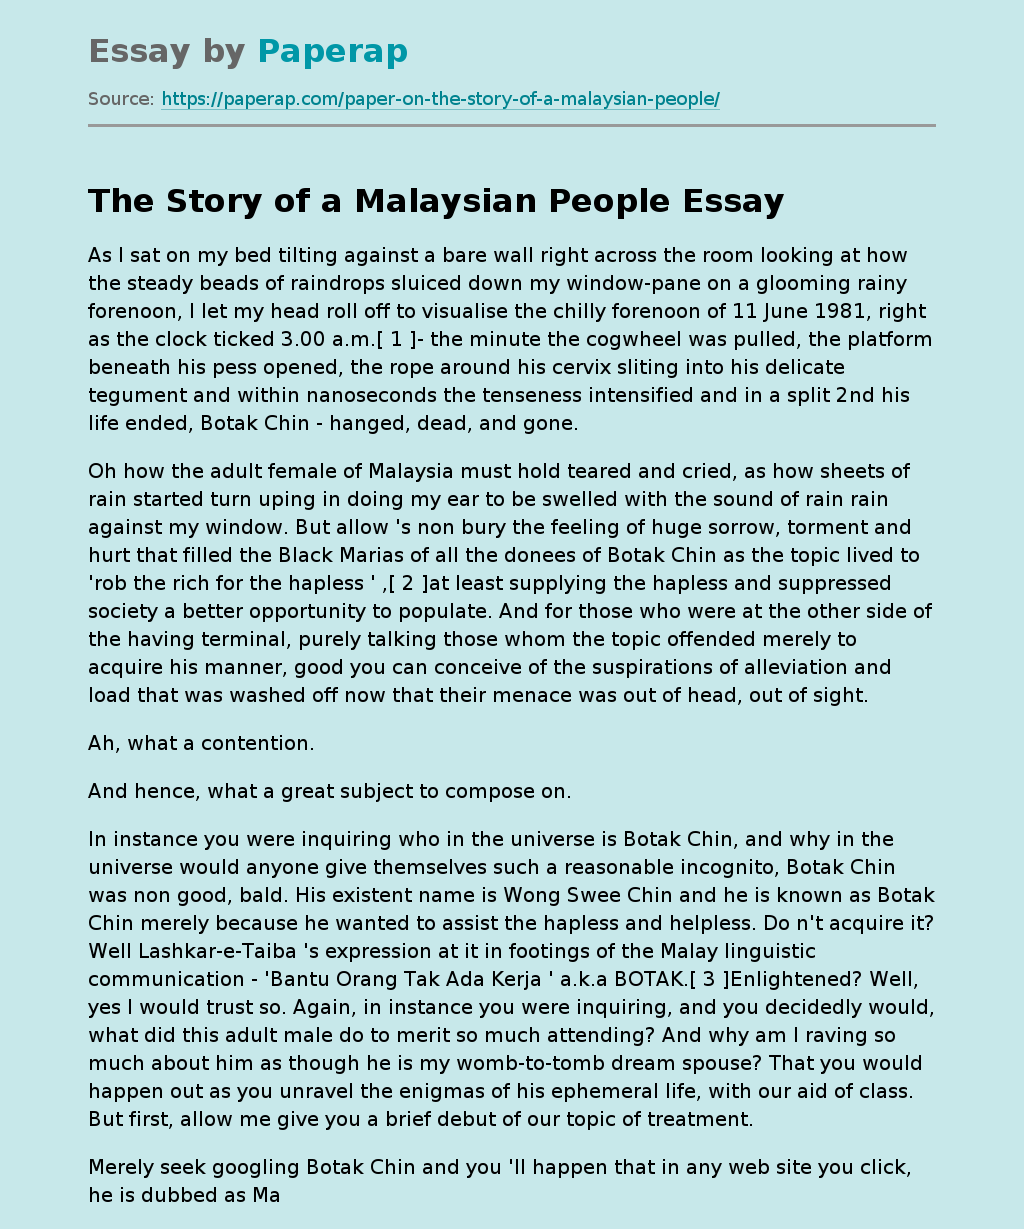 The Story of a Malaysian People